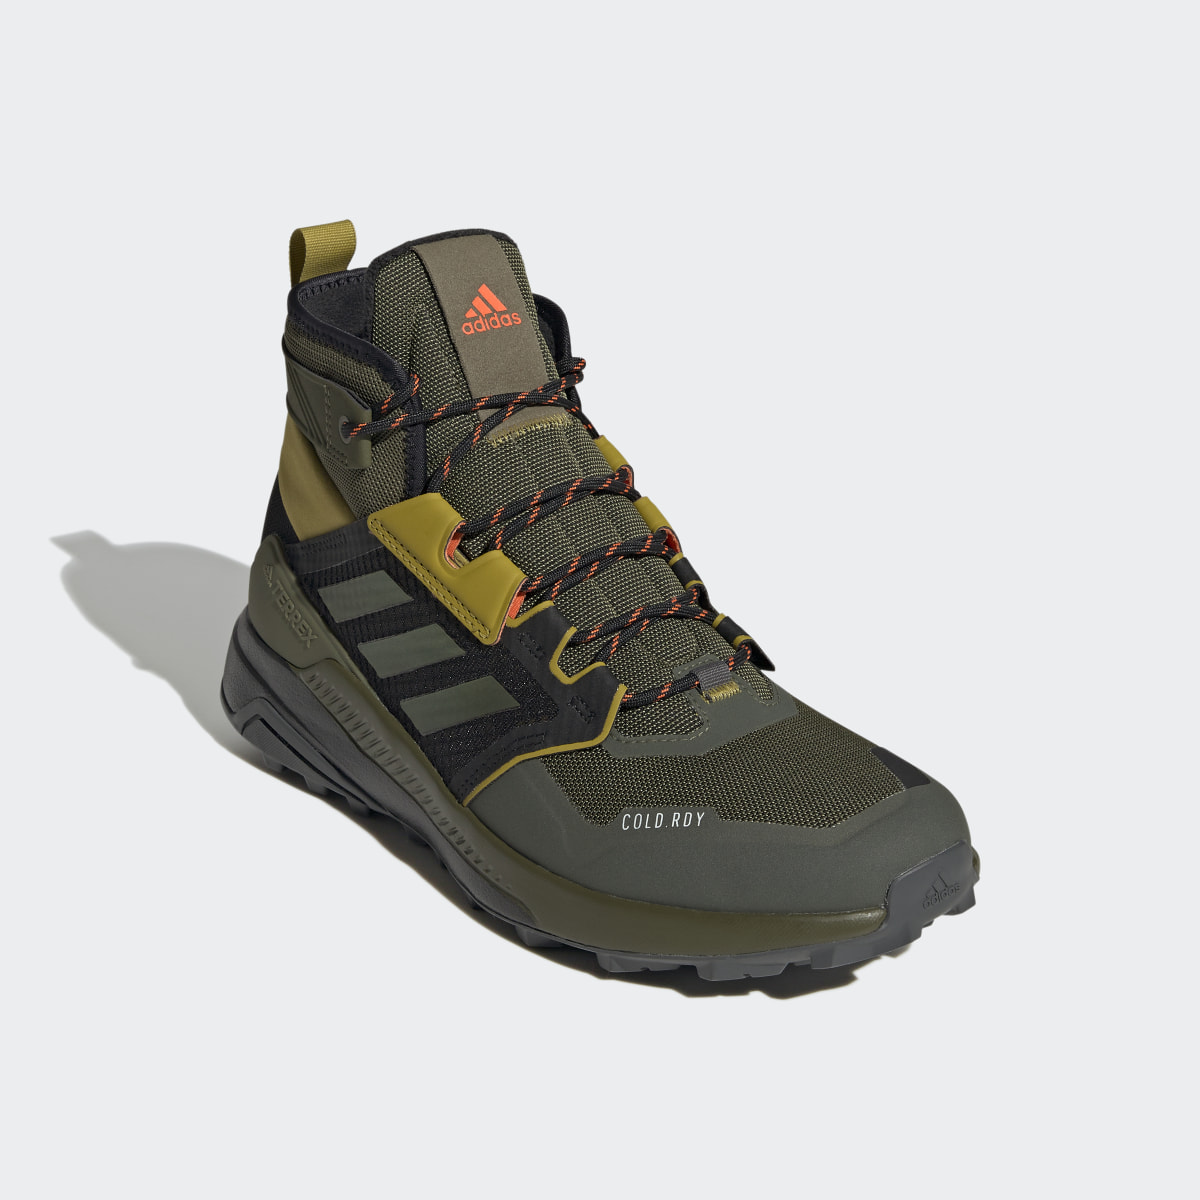 Adidas Terrex Trailmaker Mid COLD.RDY Hiking Boots. 5